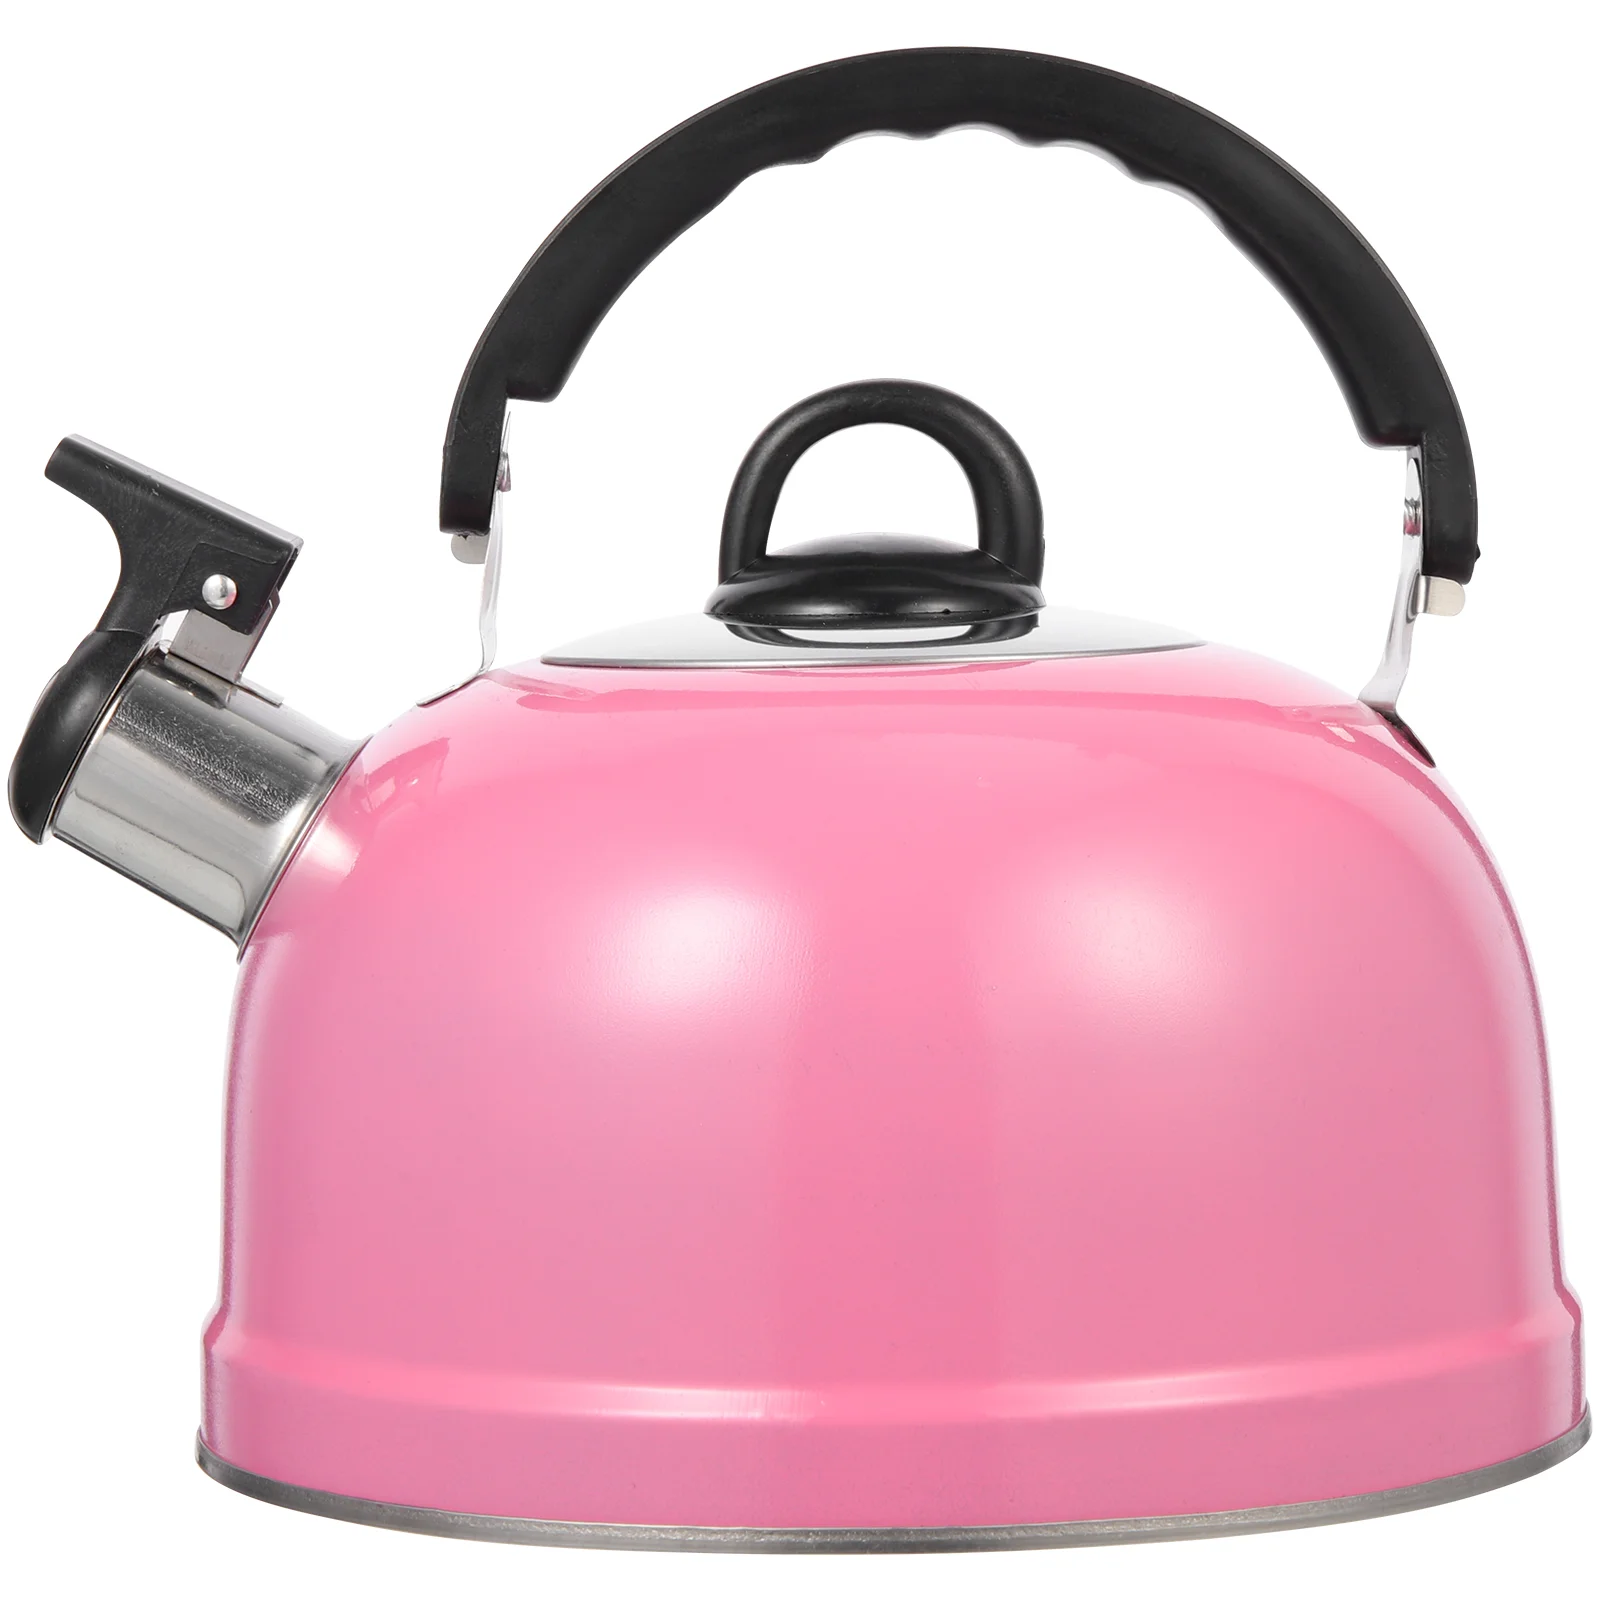 

Buzzing Kettle Heating Tea Pot Stove Teapot Stainless Steel Teakettle Japanese Teapots Camping Gas Induction Cooker Whistling